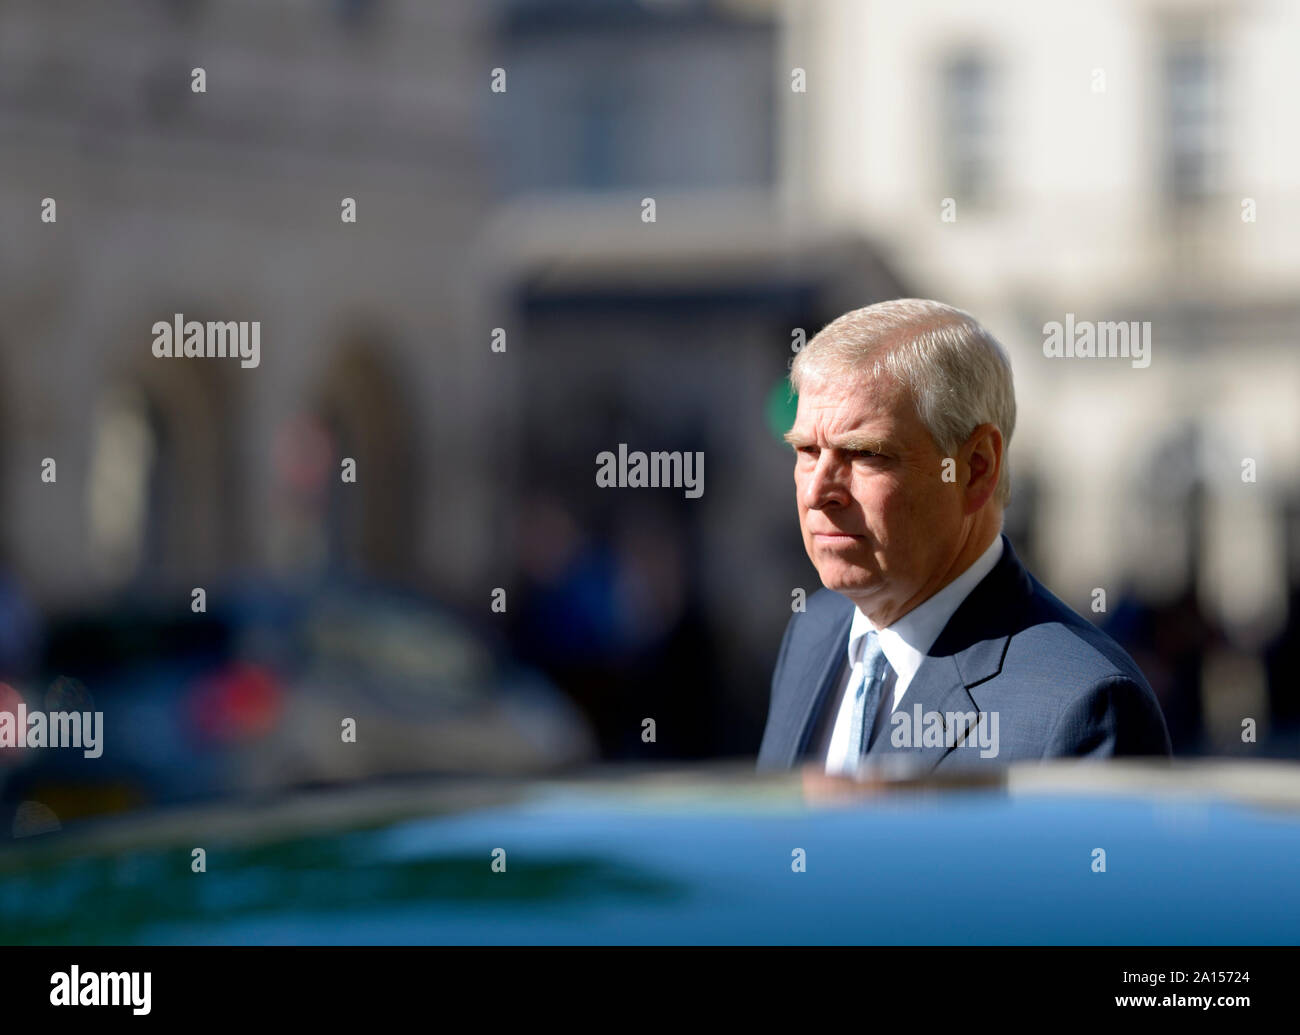 Westminster, London, UK. 17th September 2019. Prince Andrew, Duke of York leaves Sixty One Whitehall - prestigious event and conference venue in Westm Stock Photo